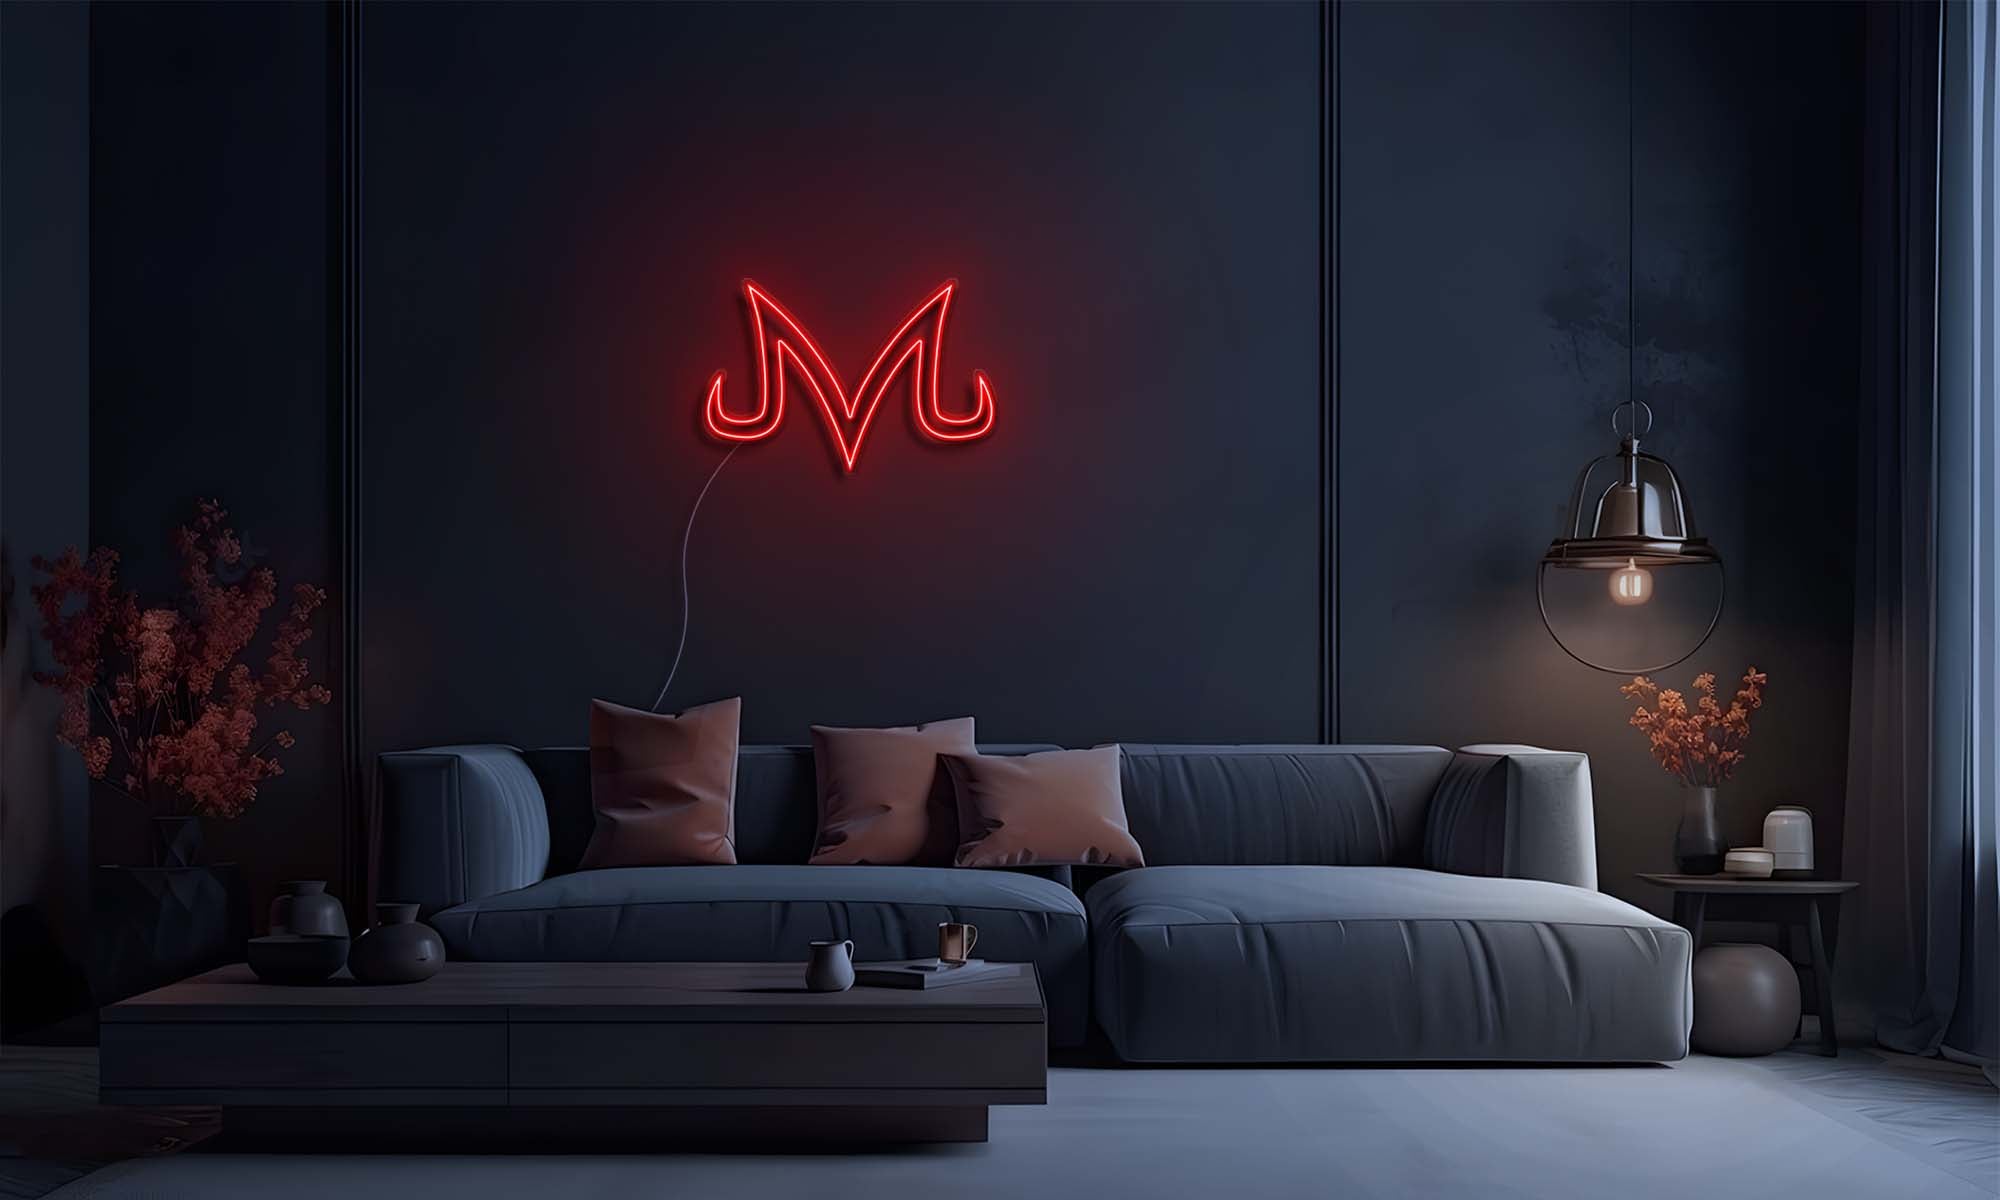 Modern living room with a red Dragon Ball anime Majin symbol neon sign glowing on the wall above a couch